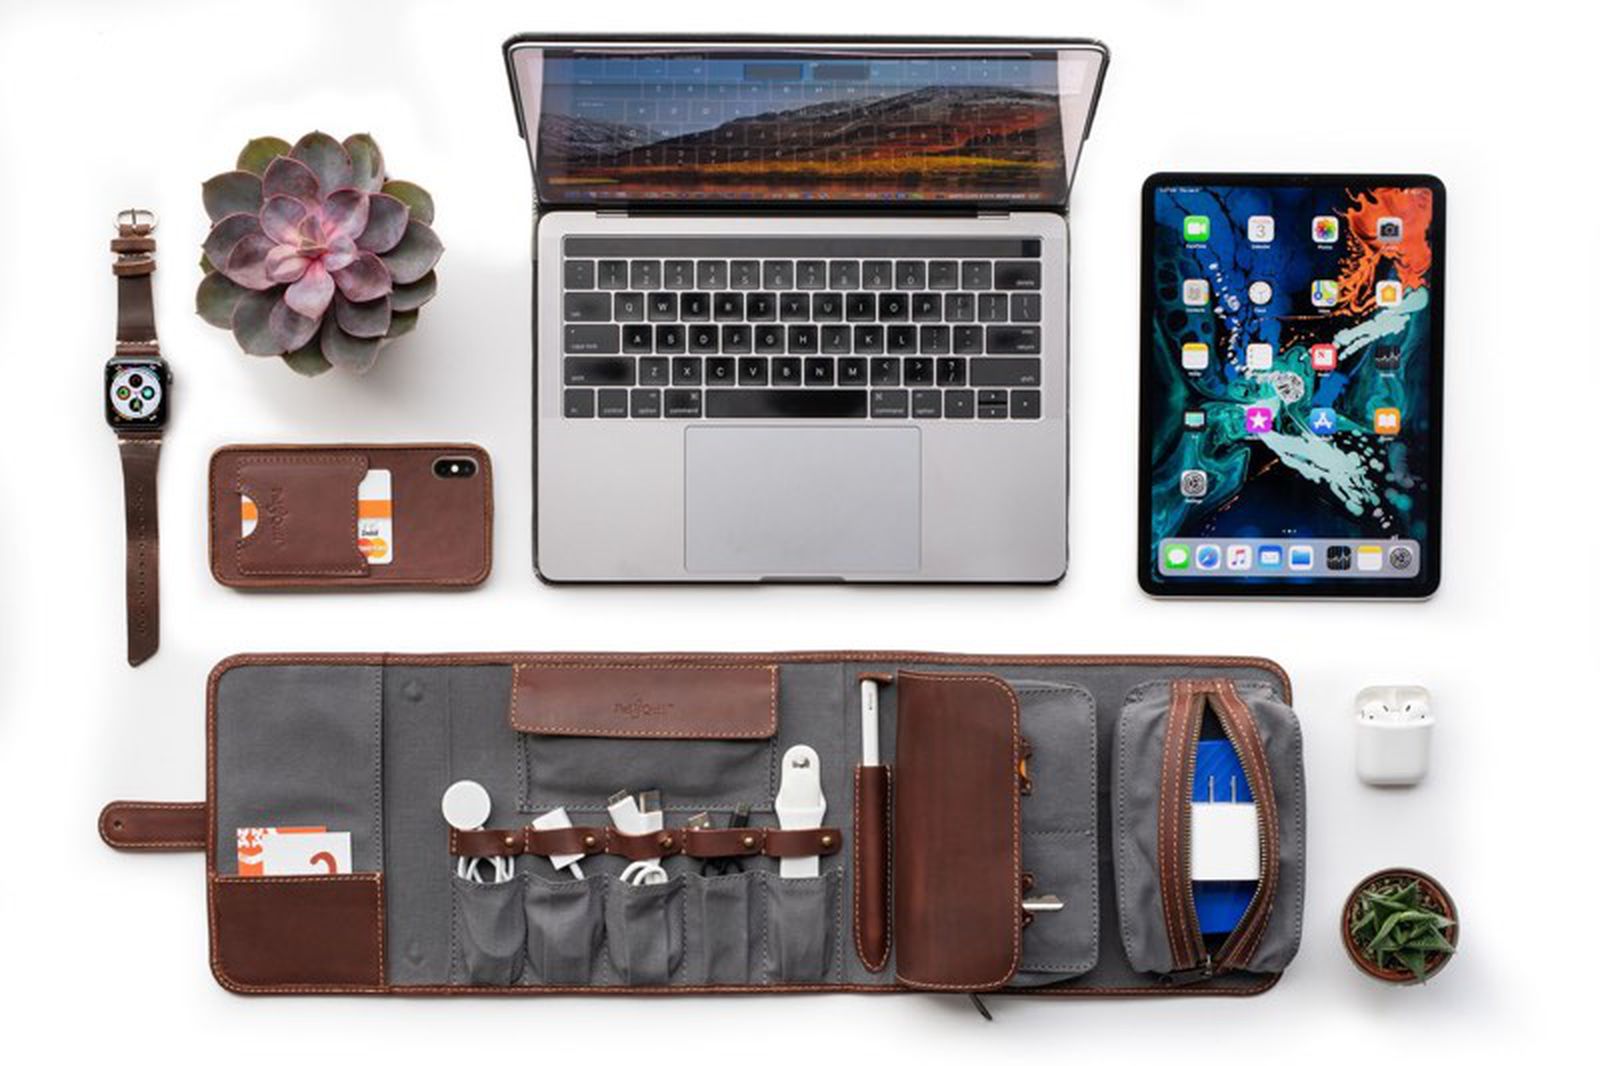 CES 2019: Pad & Quill Expands TechFolio Series With New Mini and Pro ...